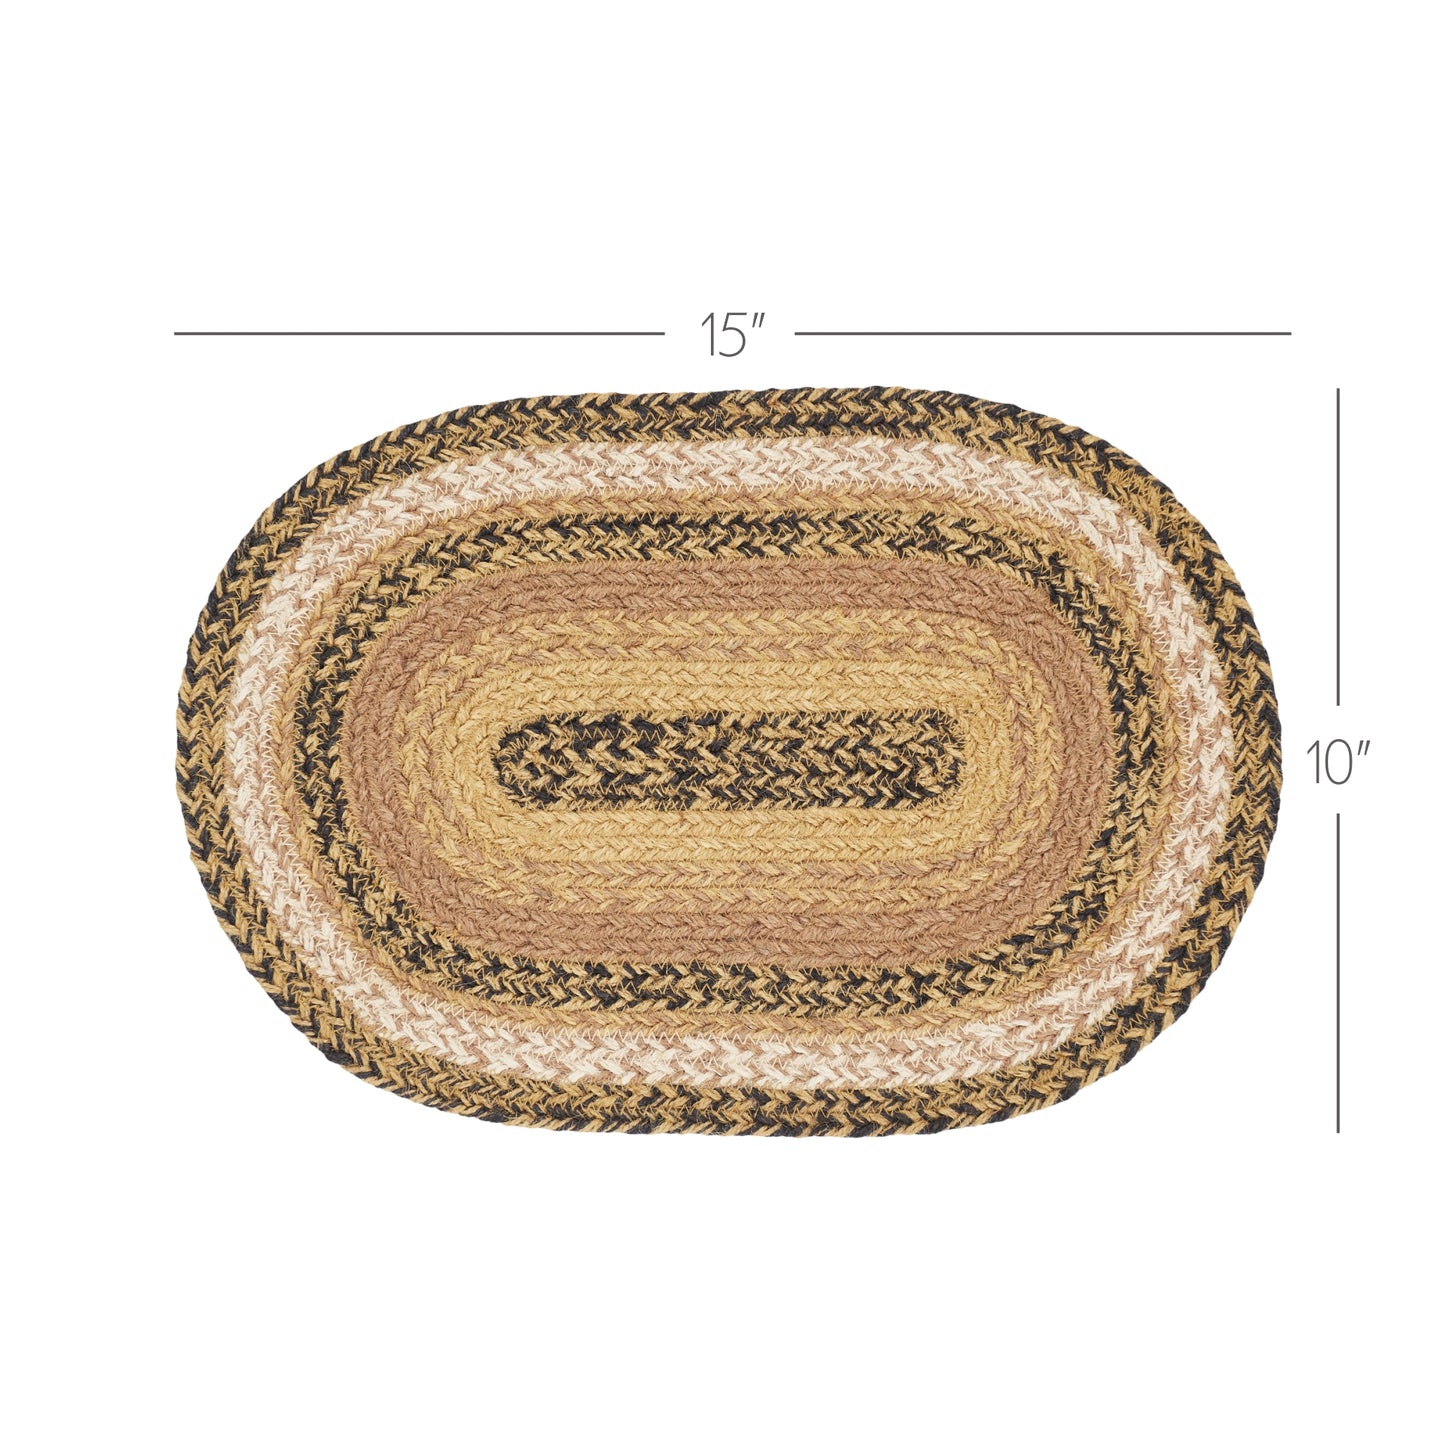 81386-Kettle-Grove-Jute-Oval-Placemat-10x15-image-1